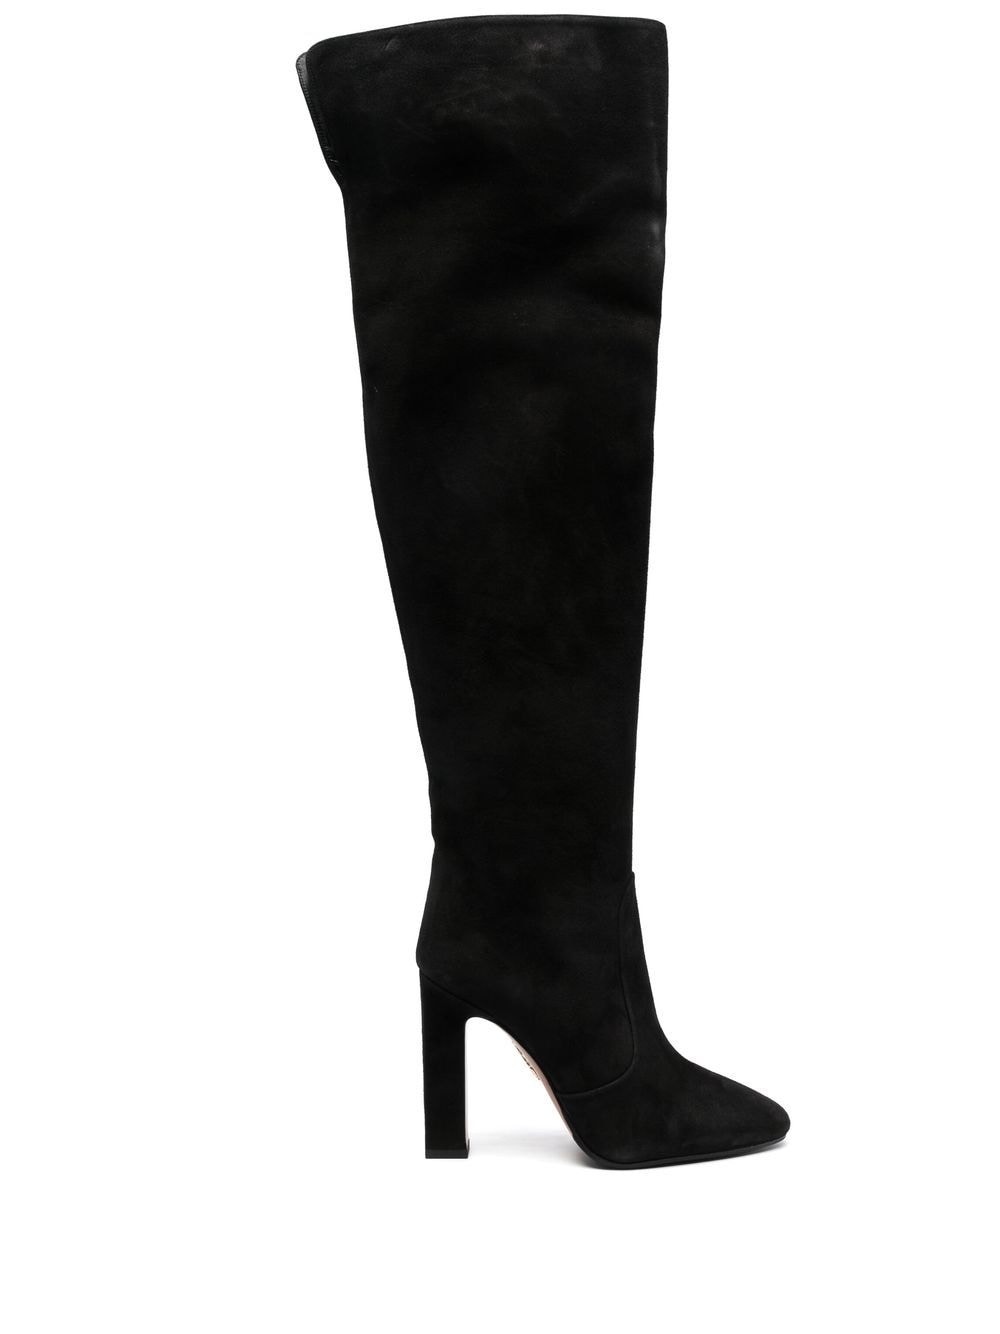 130mm knee-high suede boots - 1